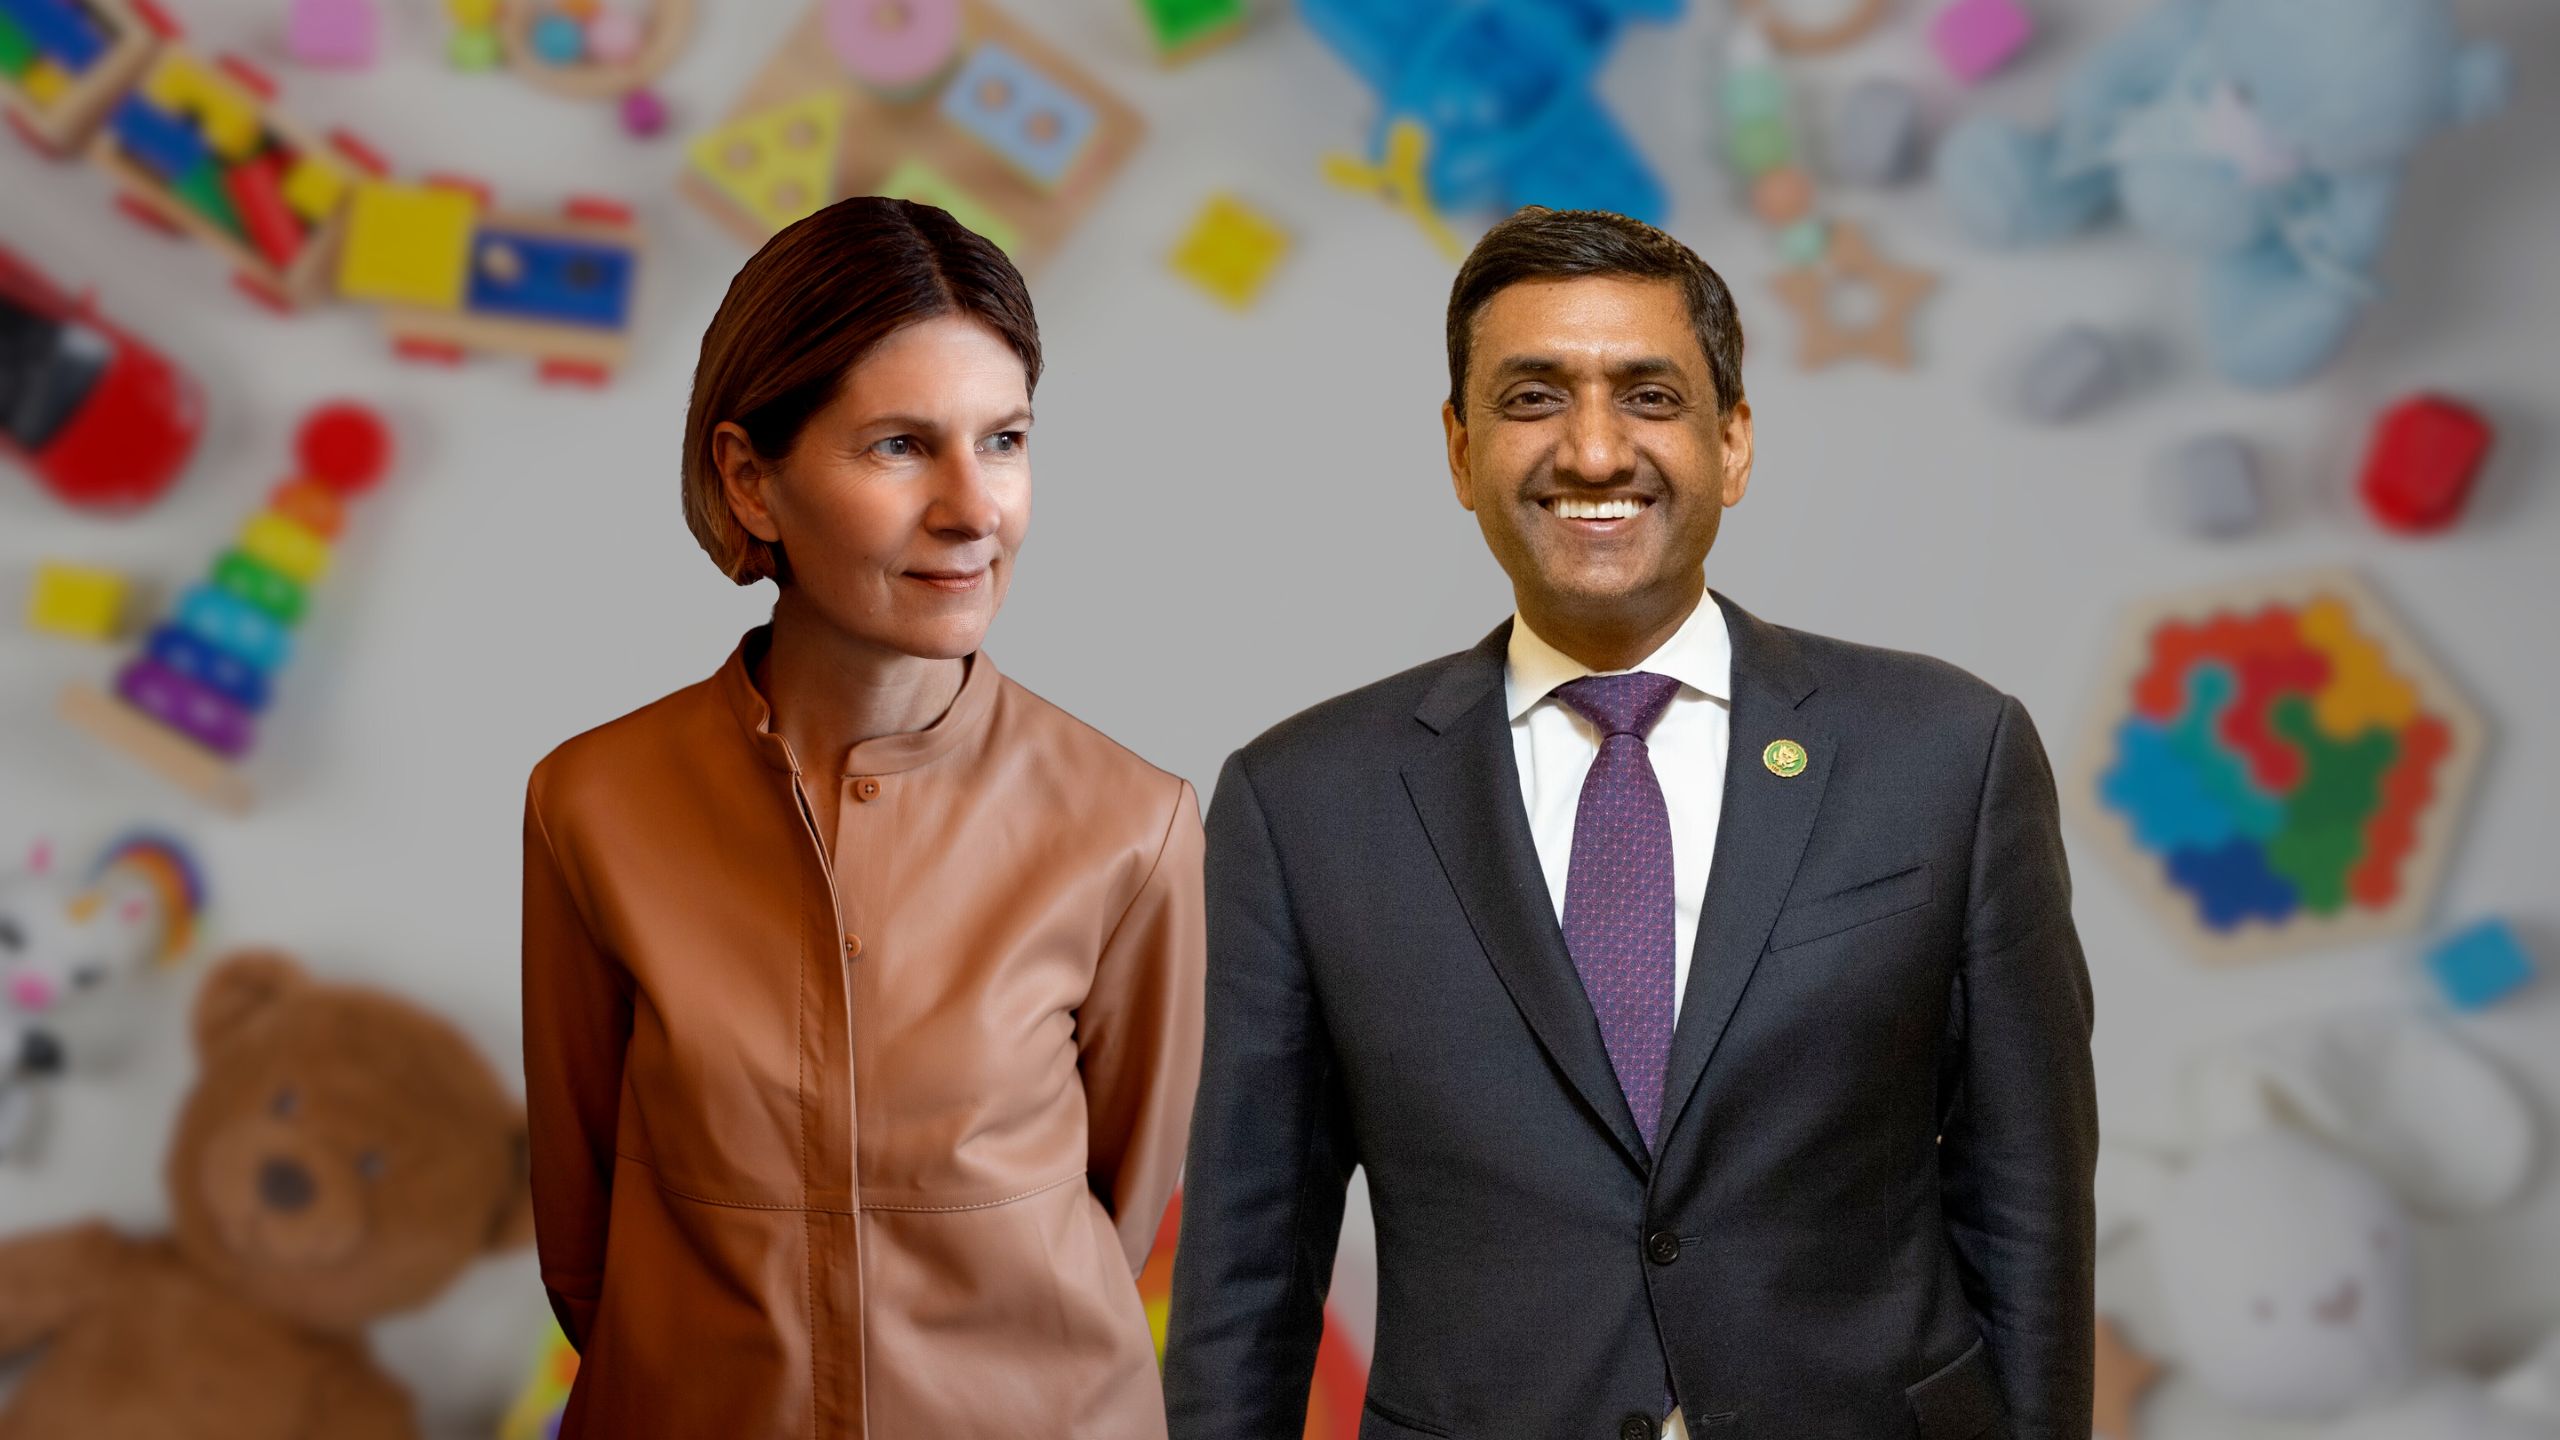 Top Takeaways from the Fireside Chat: The Future of Child Care with Rep. Ro Khanna and Wendy Doyle